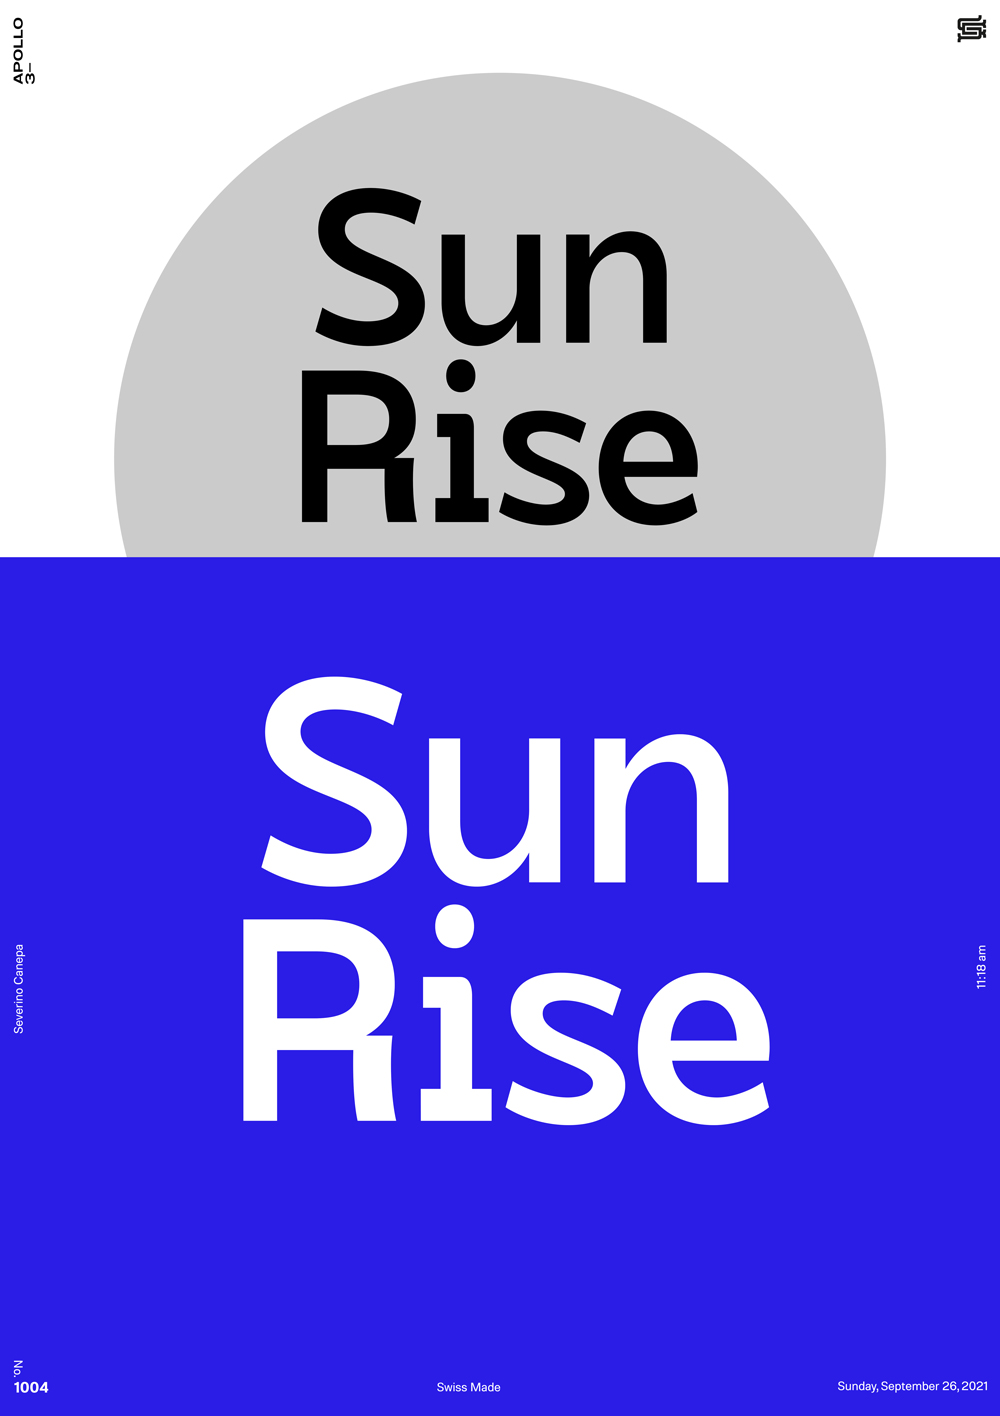 Minimalist and typographic composition representing a sun and a sea